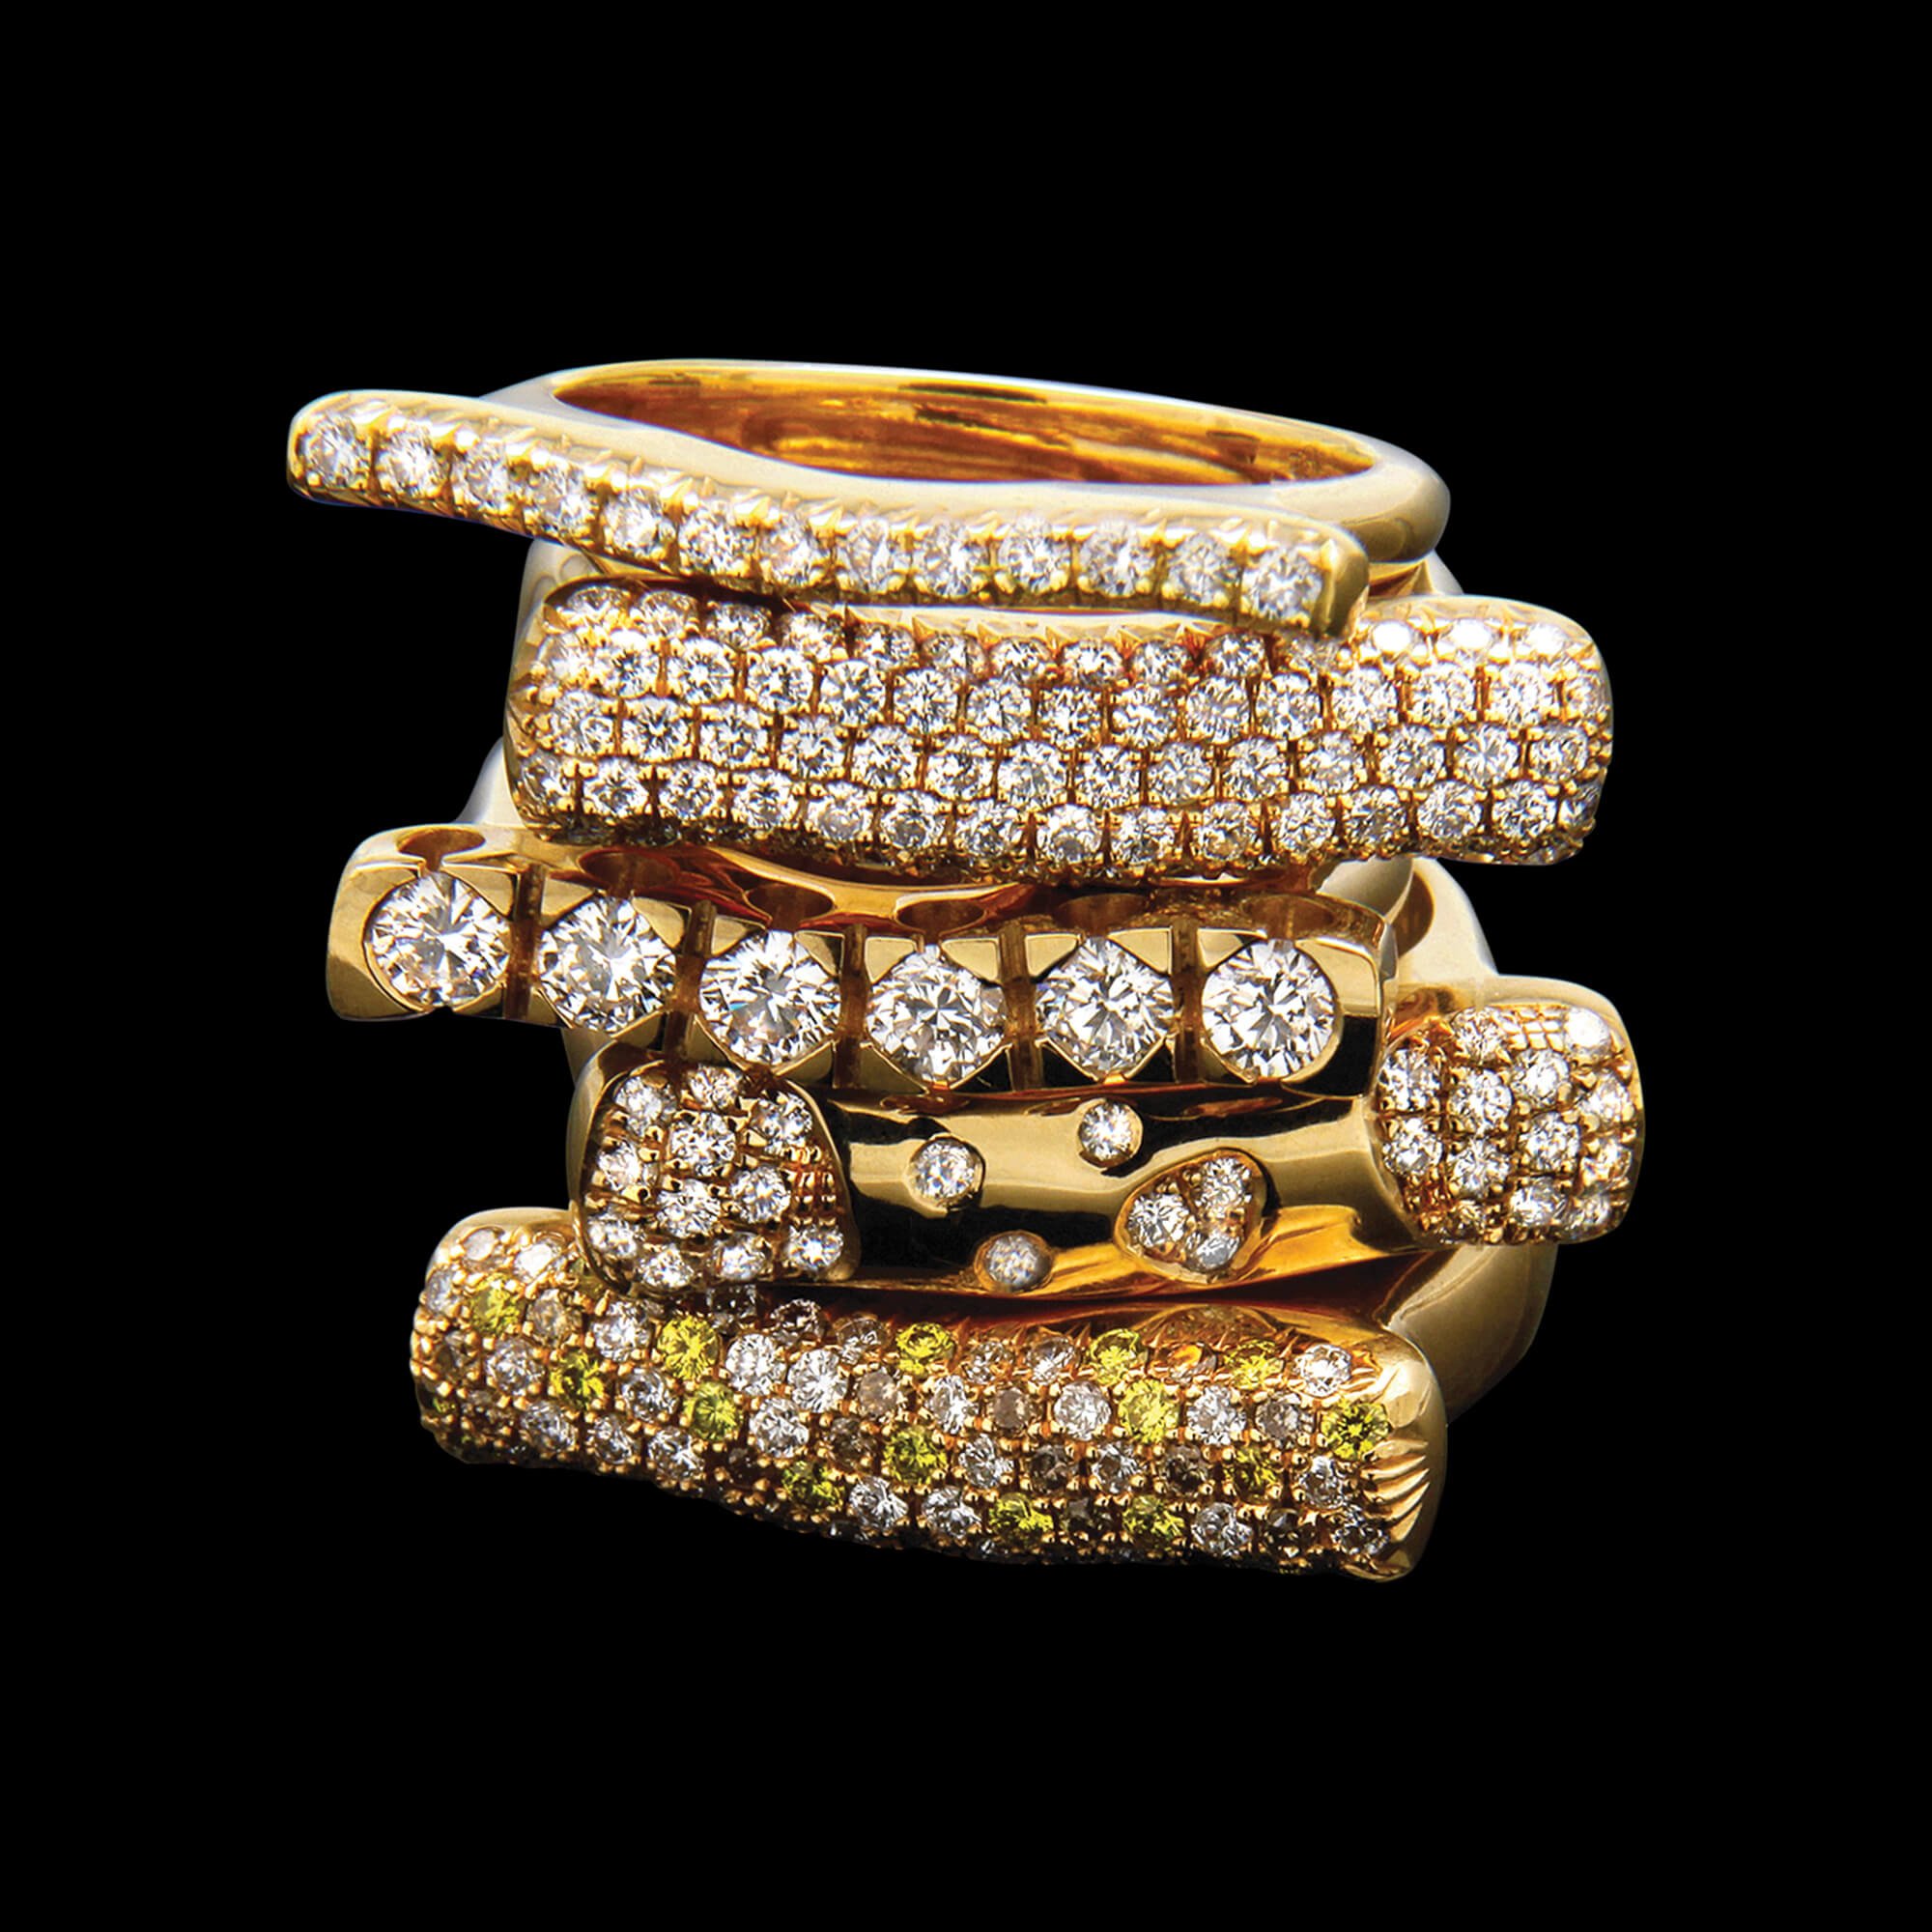 Custom 18kt yellow gold stacking rings with diamonds and gemstones | Strata™ Collection. FRIDA | Fine Jewellery.jpg